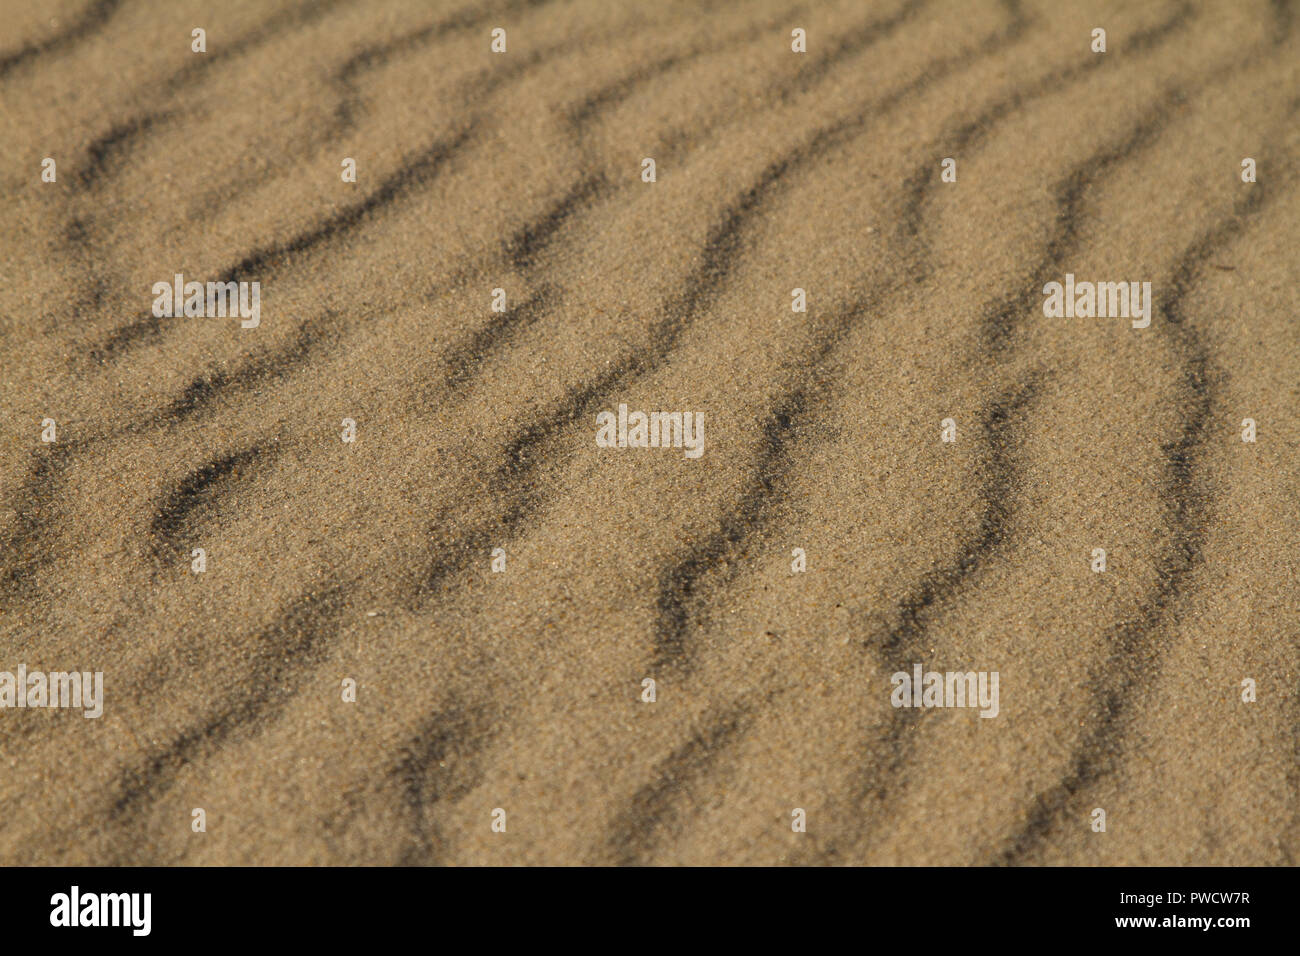 Beach sand with wavy lines. Stock Photo